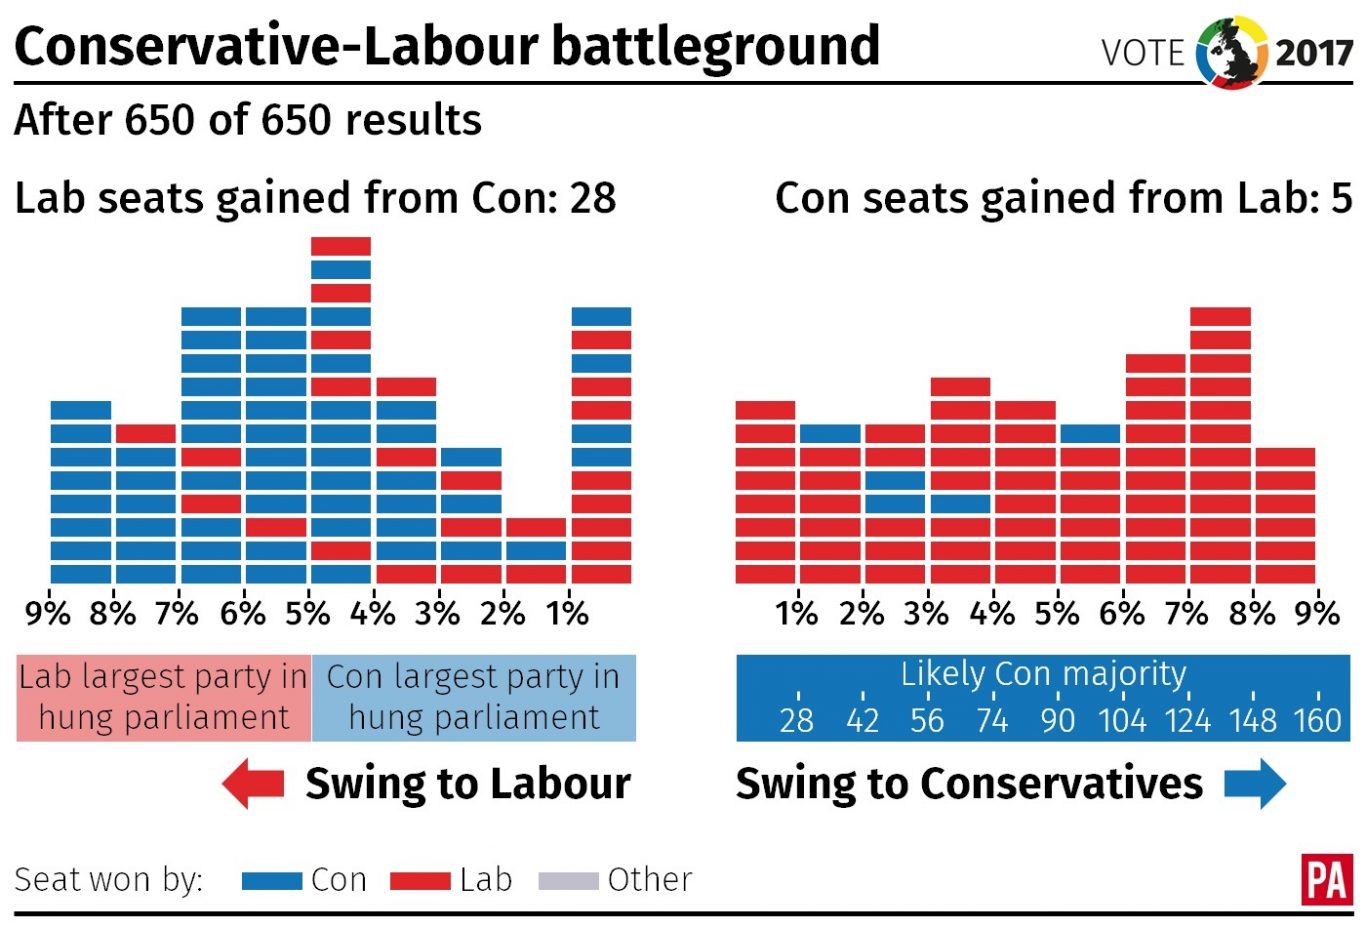 Final tallies of battleground seats won and lost in the 2017 general election graphic